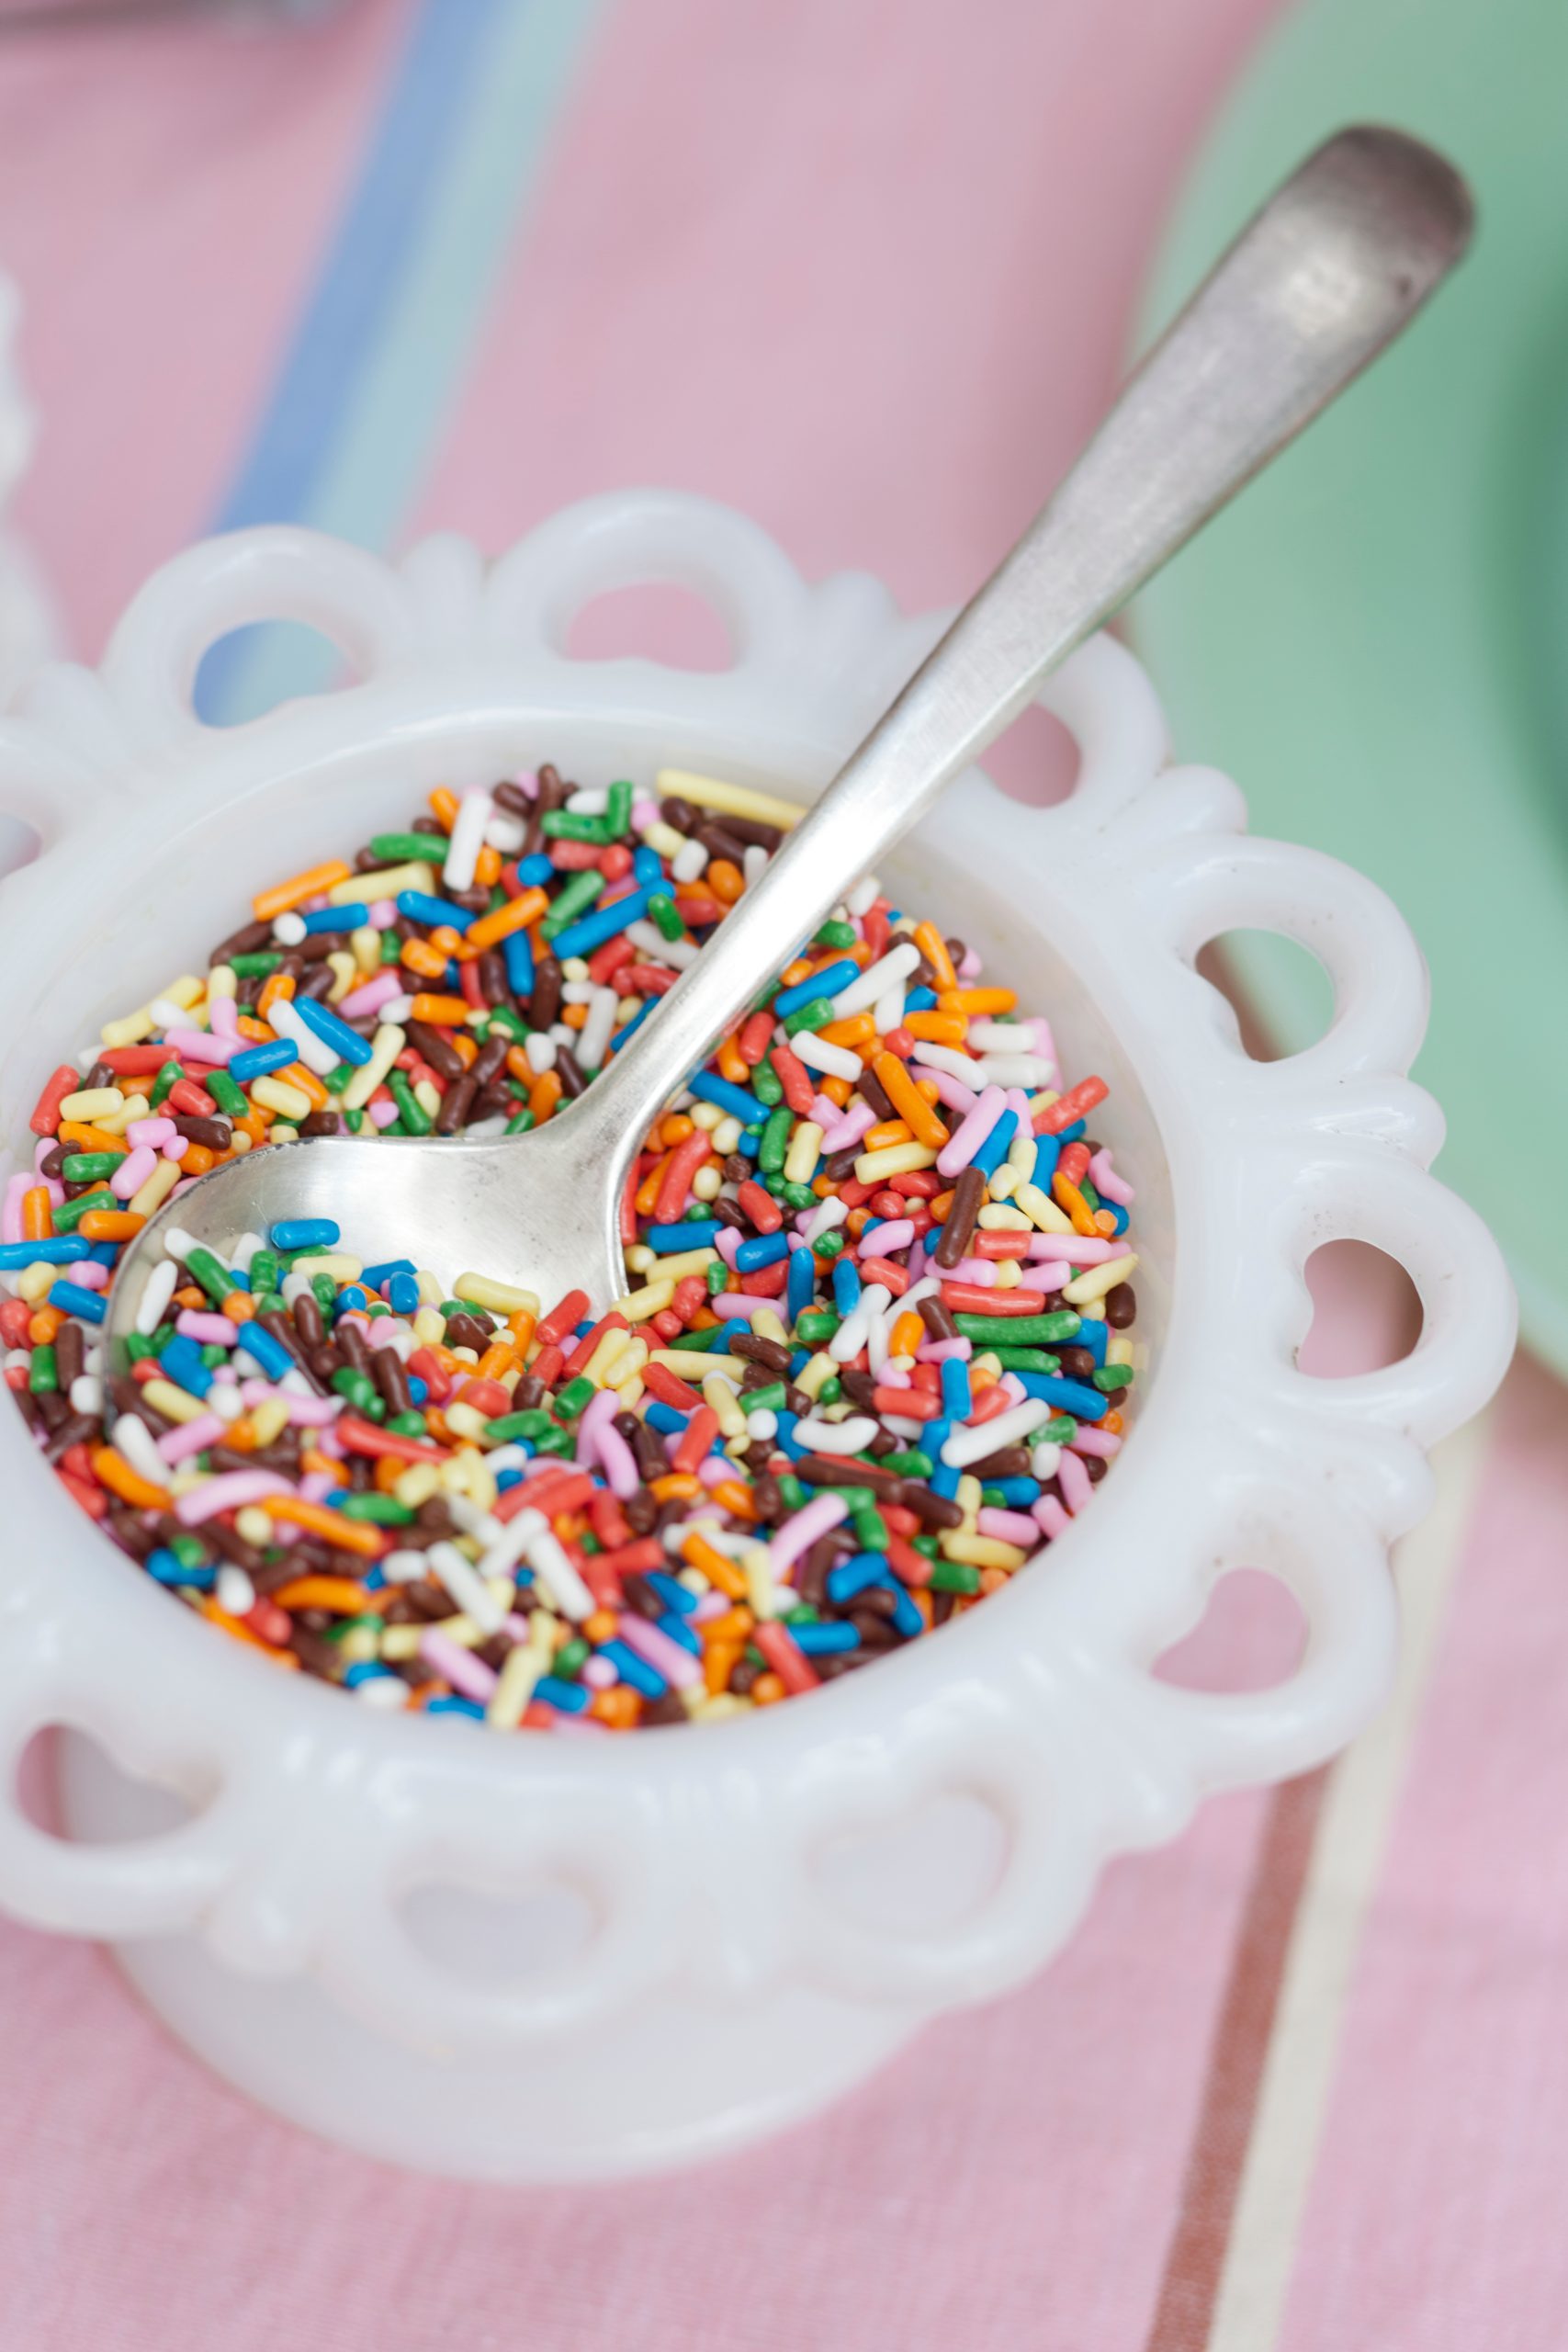 Make National Ice Cream Day special with sprinkles!